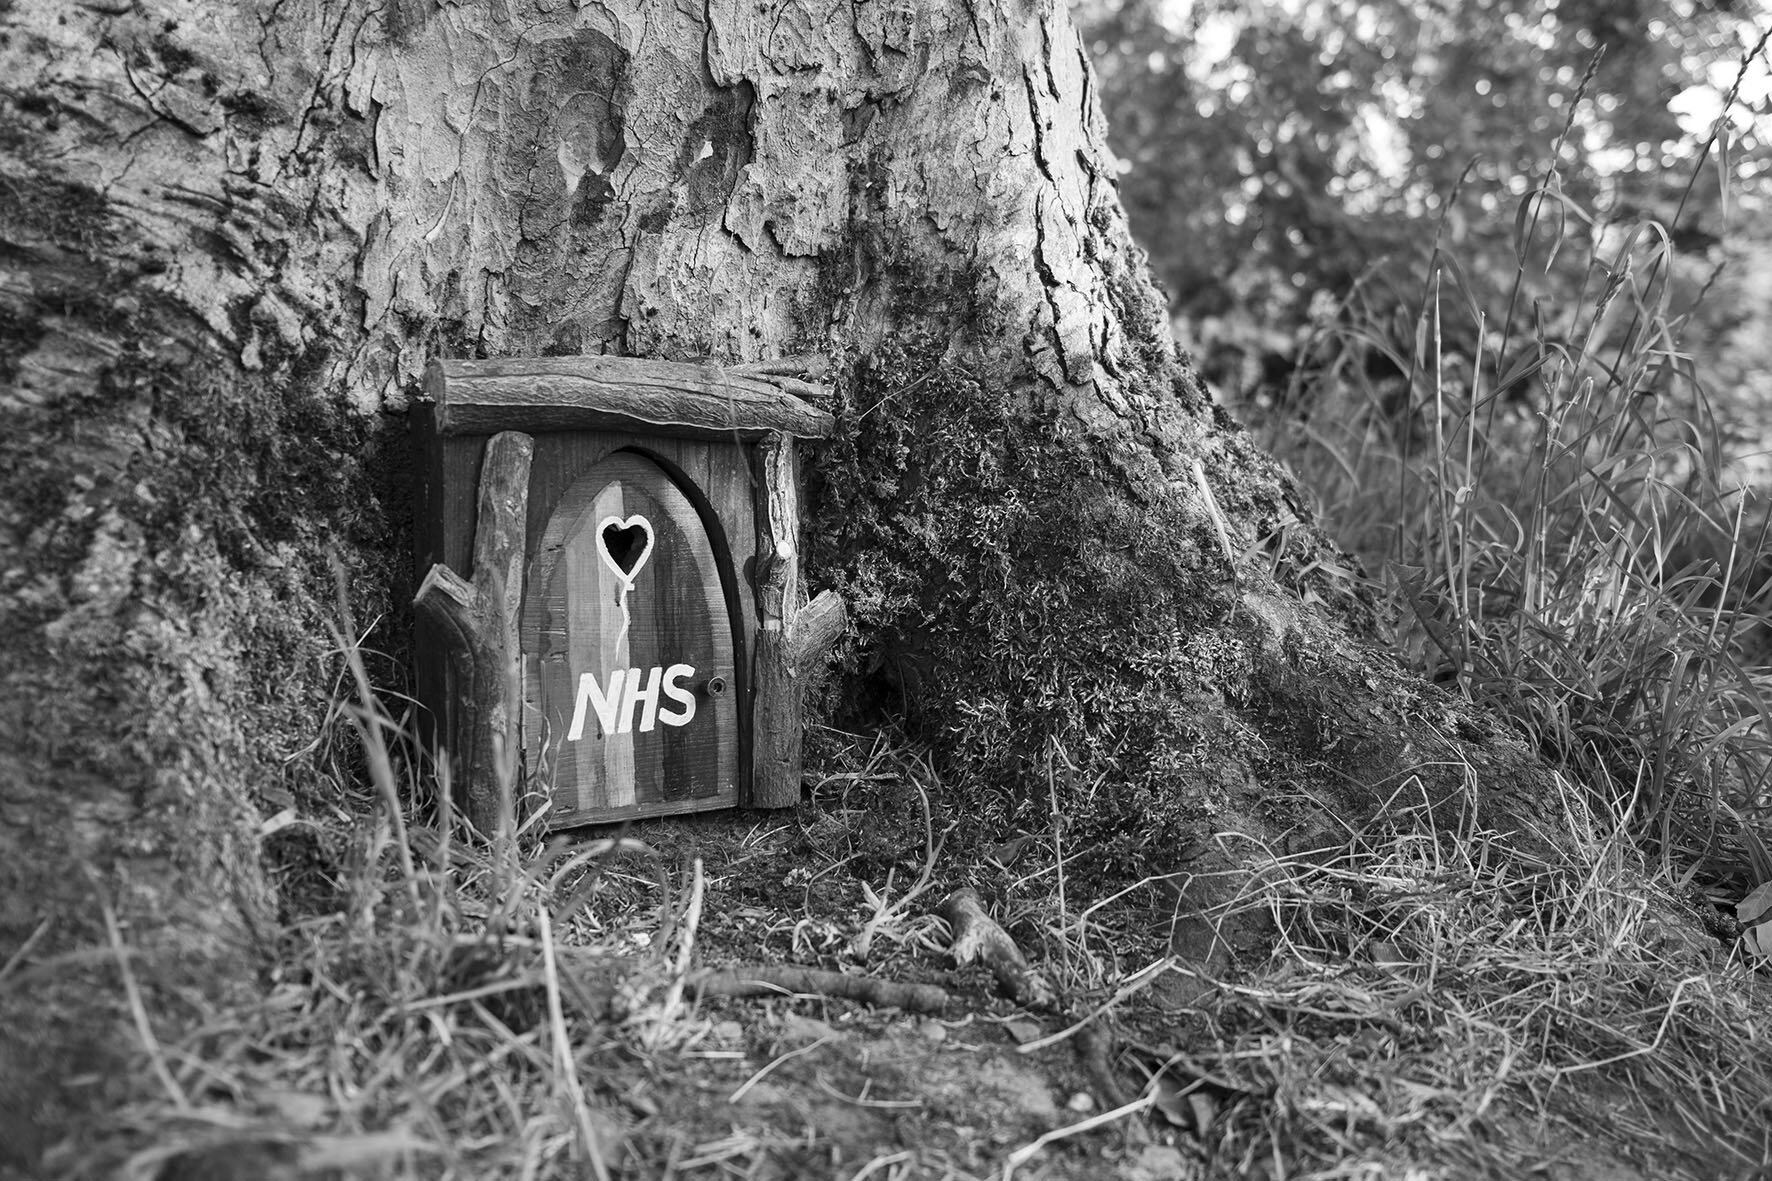  Tiny wooden ‘fairy’ door attached to a tree, with a heart shaped hole in support of NHS workers during the Coronavirus pandemic in Highbury Park. May 2020. Kings Heath. 